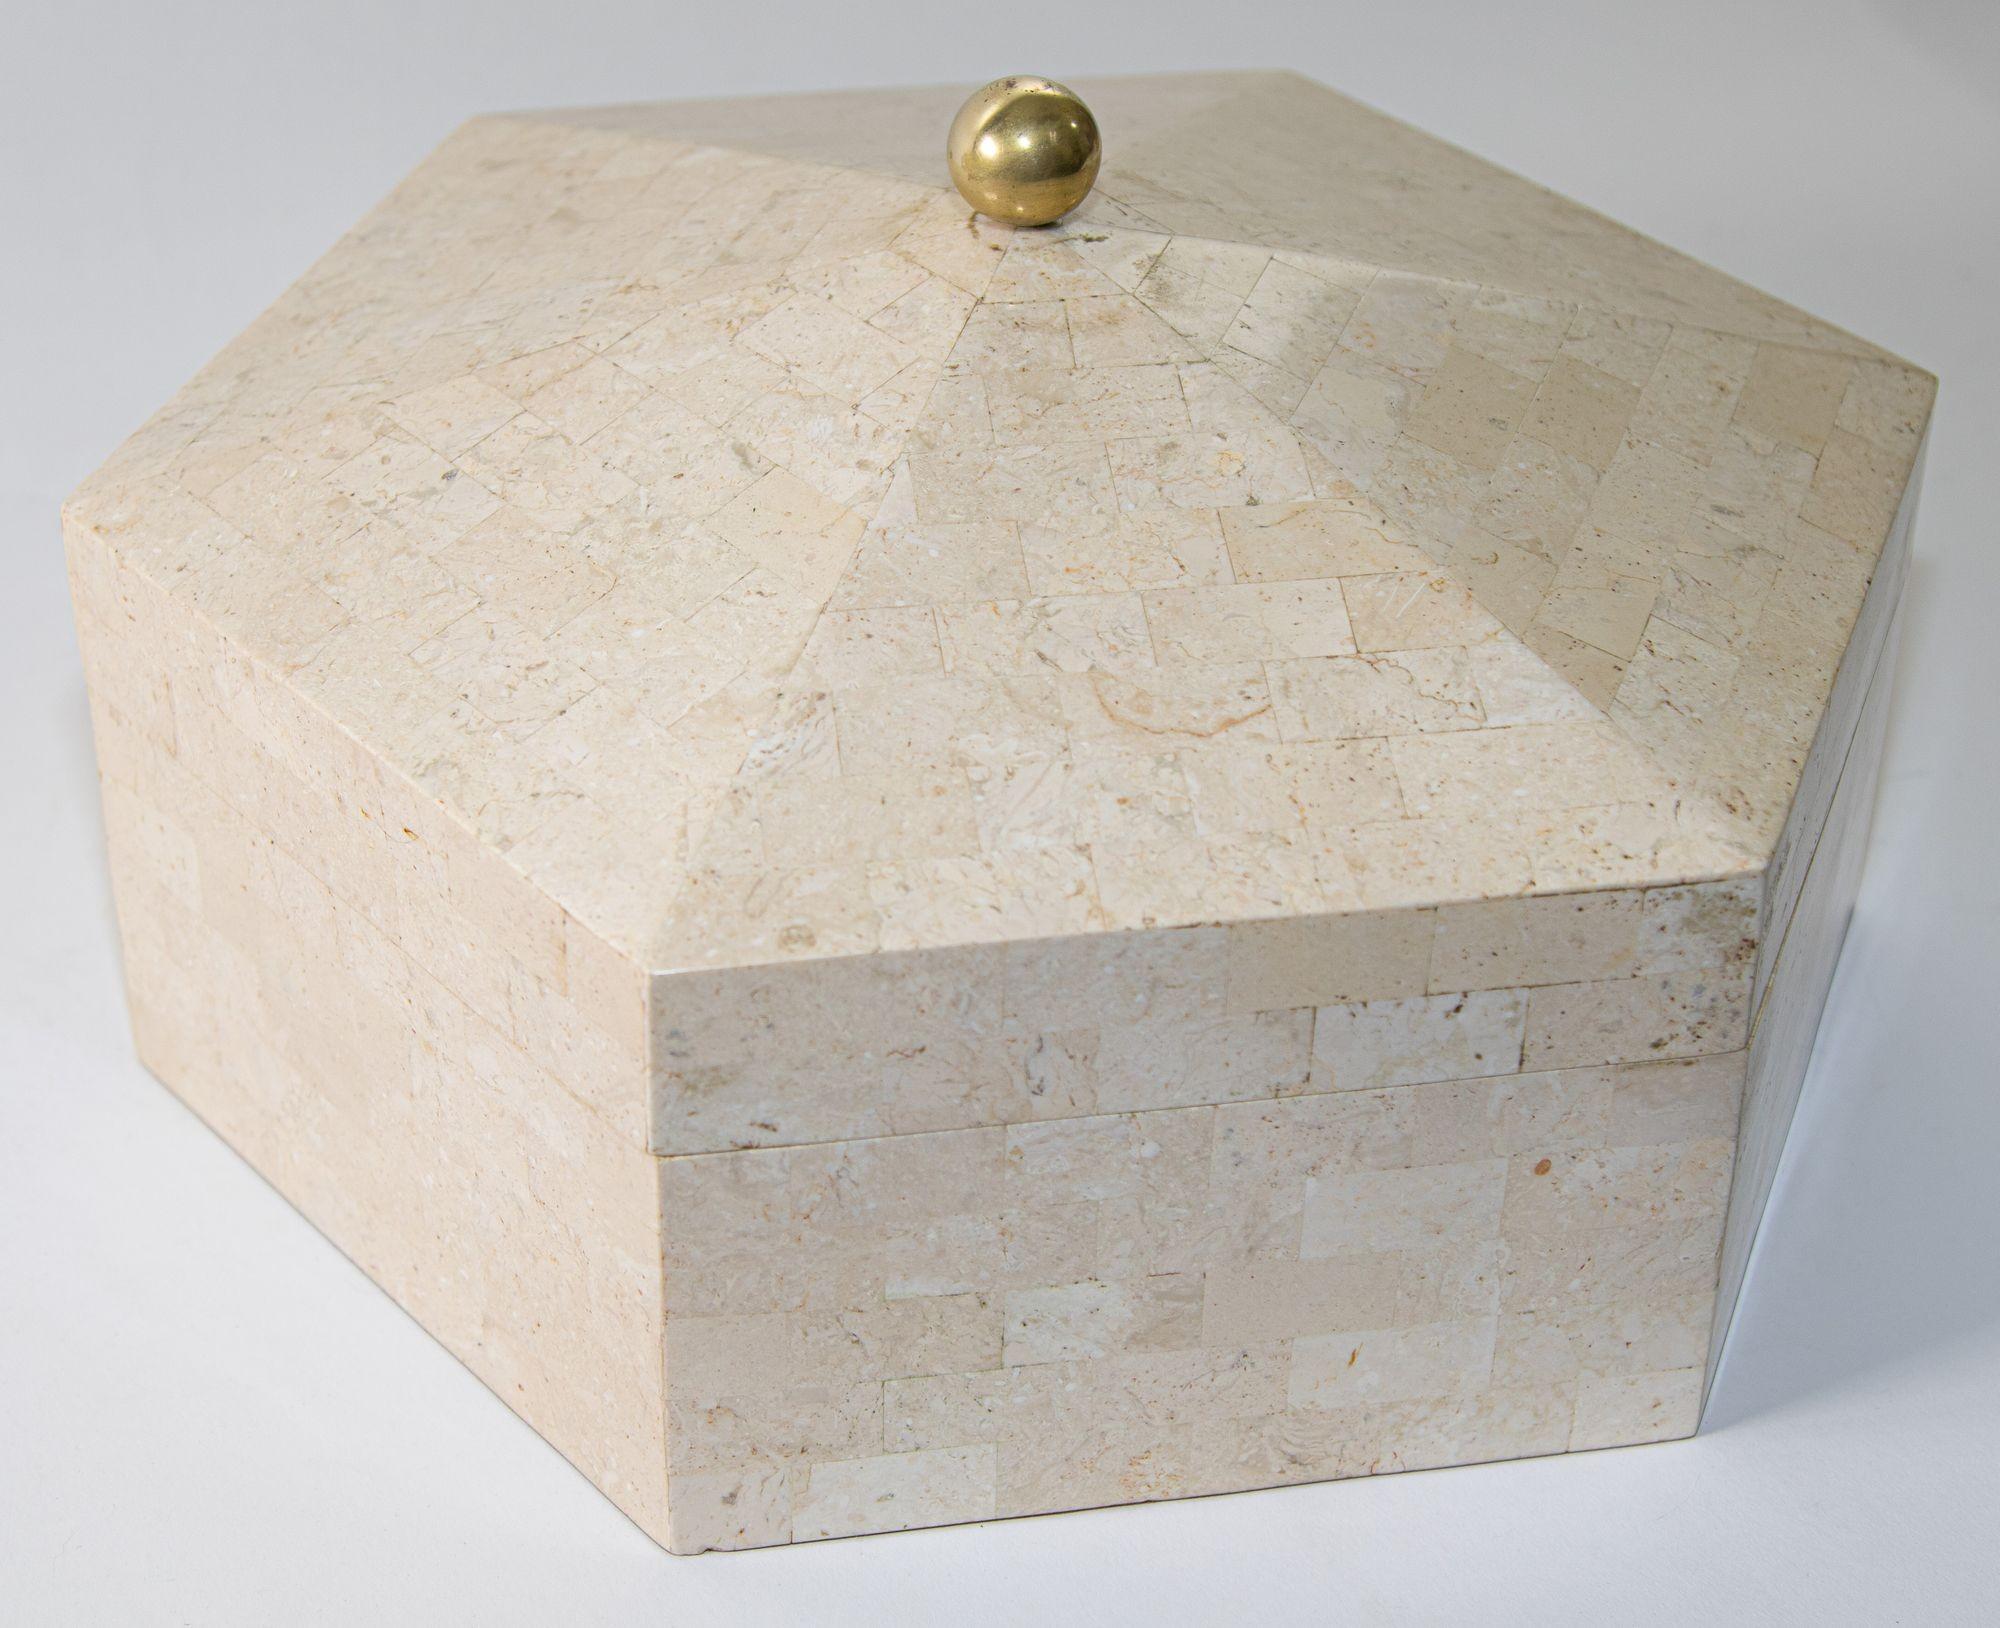 Post Modern 1980s Maitland Smith Marble Covered Box with hinged lid and a round polished brass pull on top.
Vintage Postmodern geometric design decorative box white tessellated stone and lined with cedar wood.
This vintage 1980's Post Modern